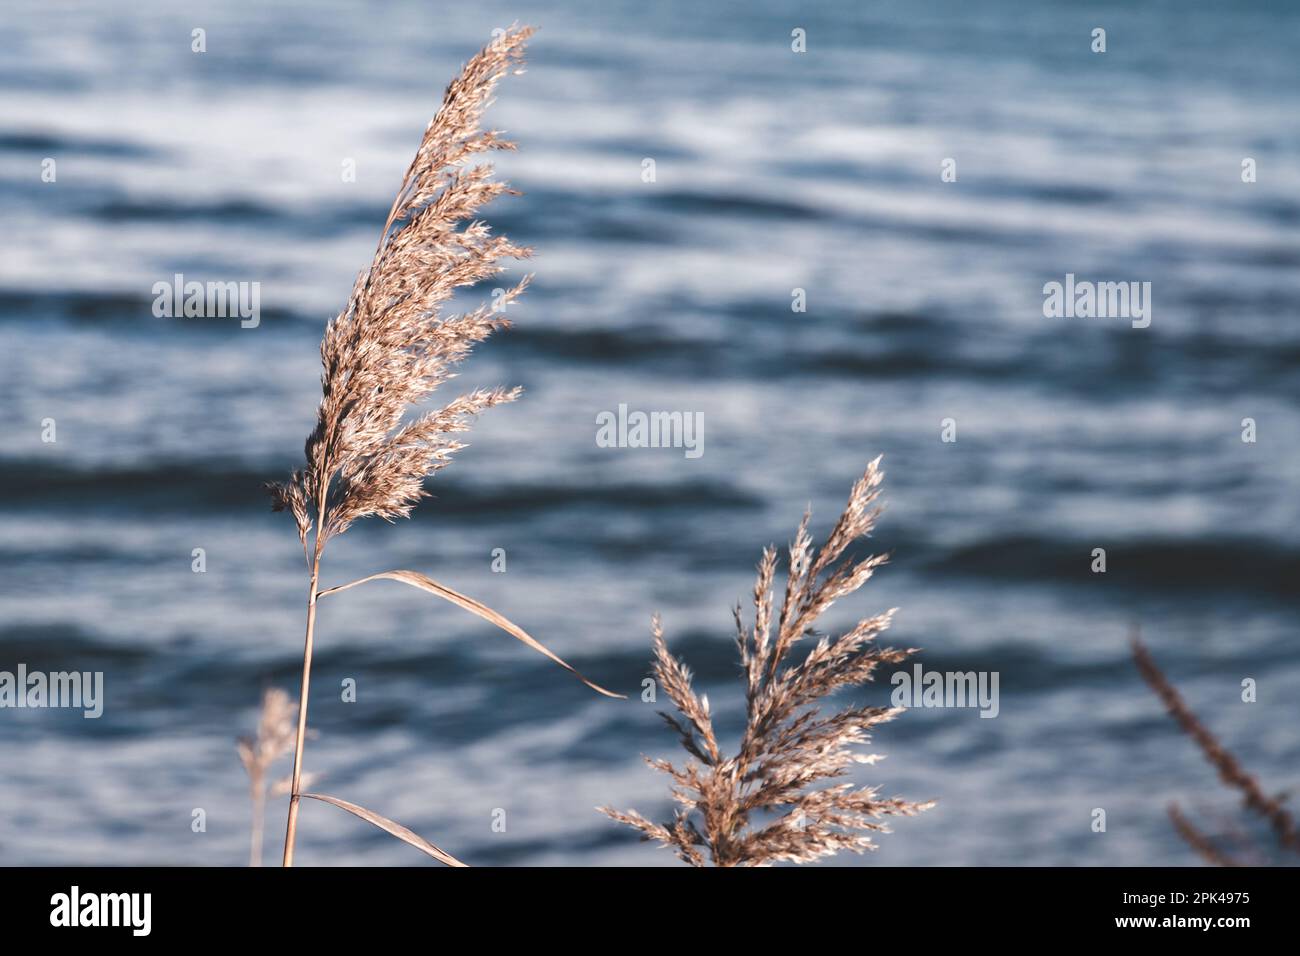 Dry coastal reed on blurred blue water background, natural photo with selective focus Stock Photo